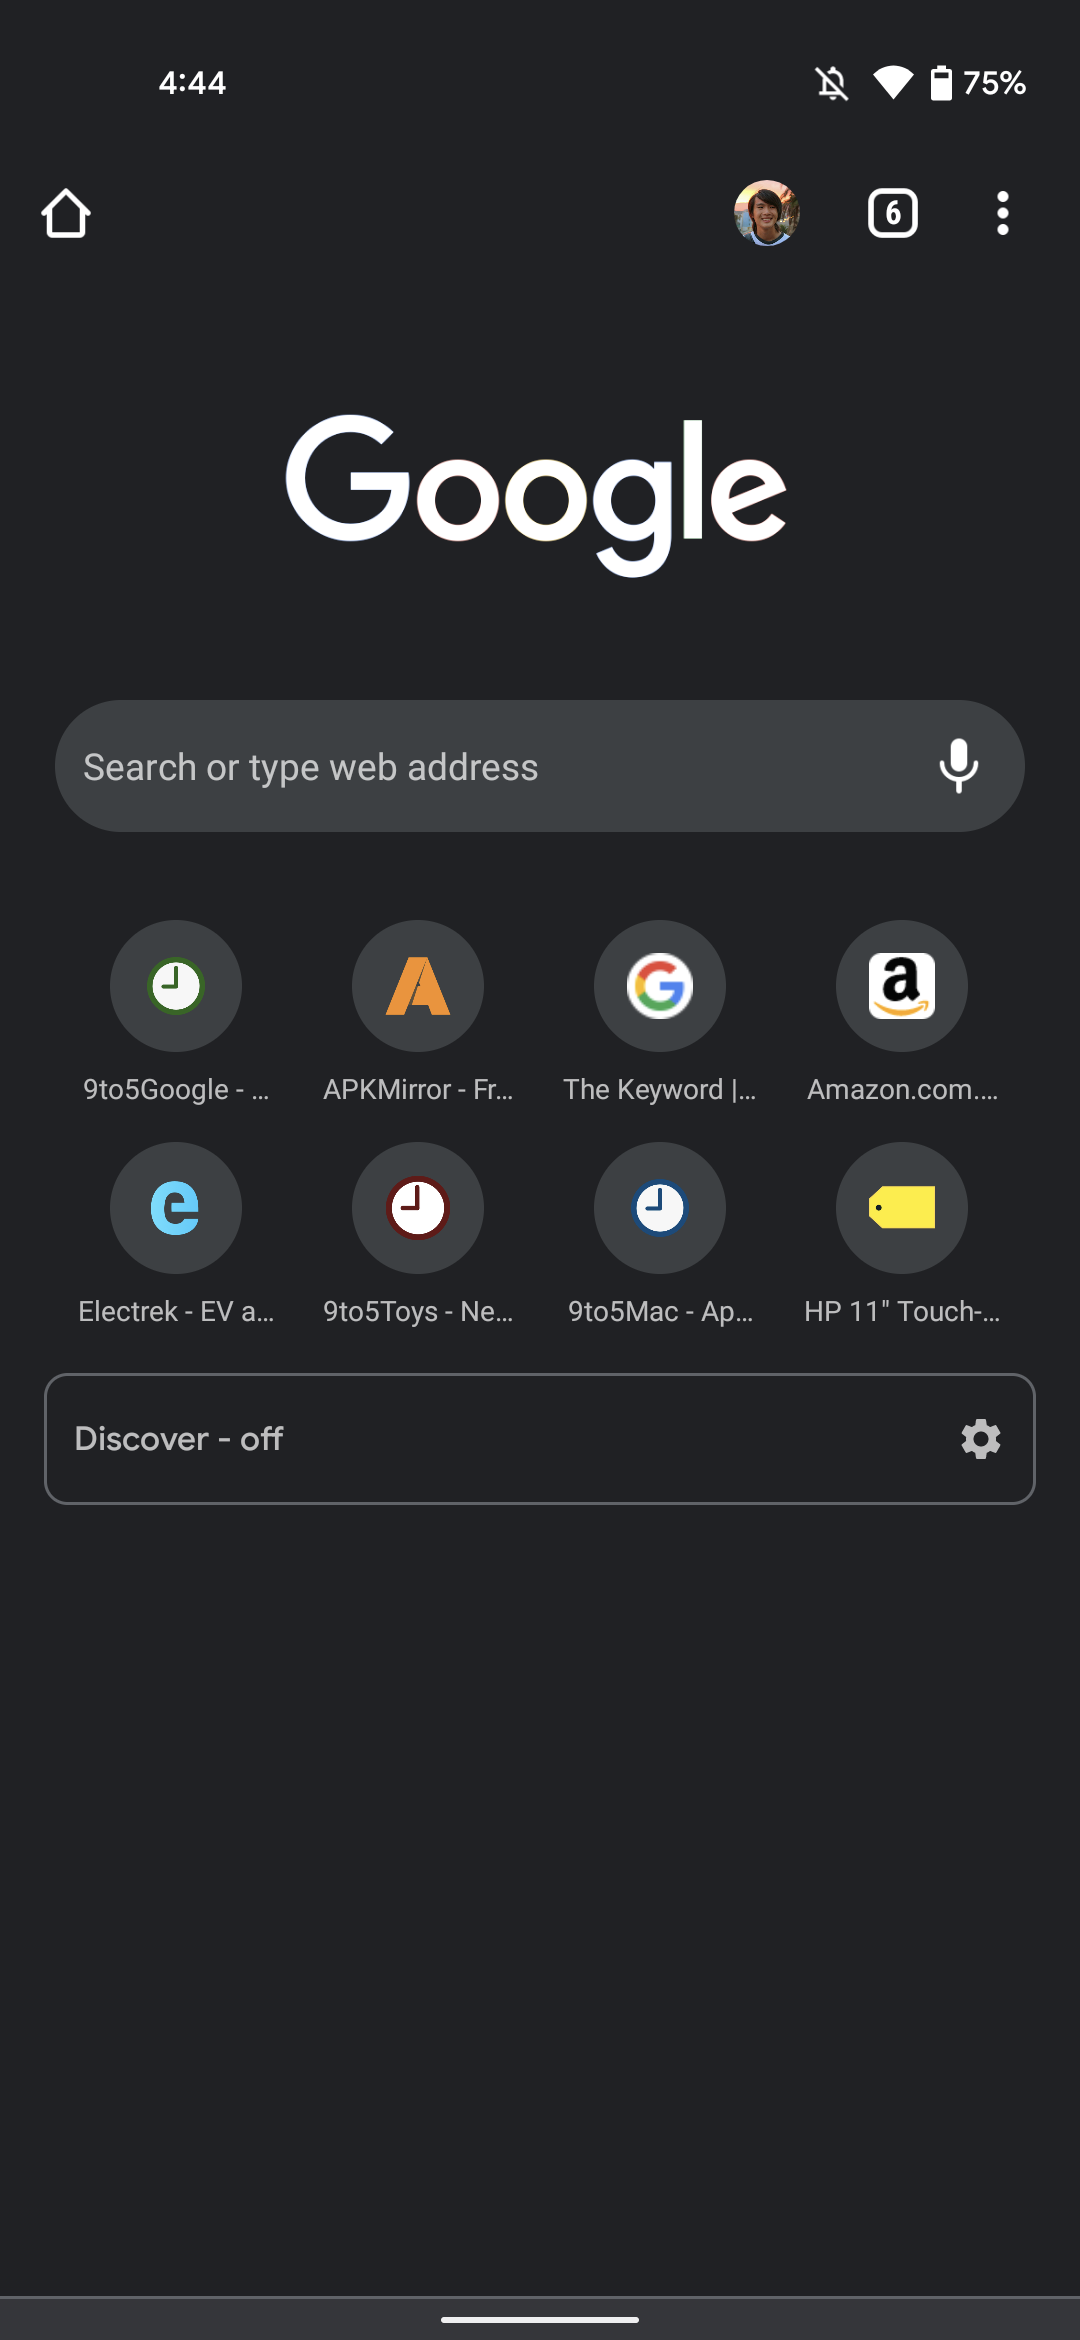 cast chrome tab from phone